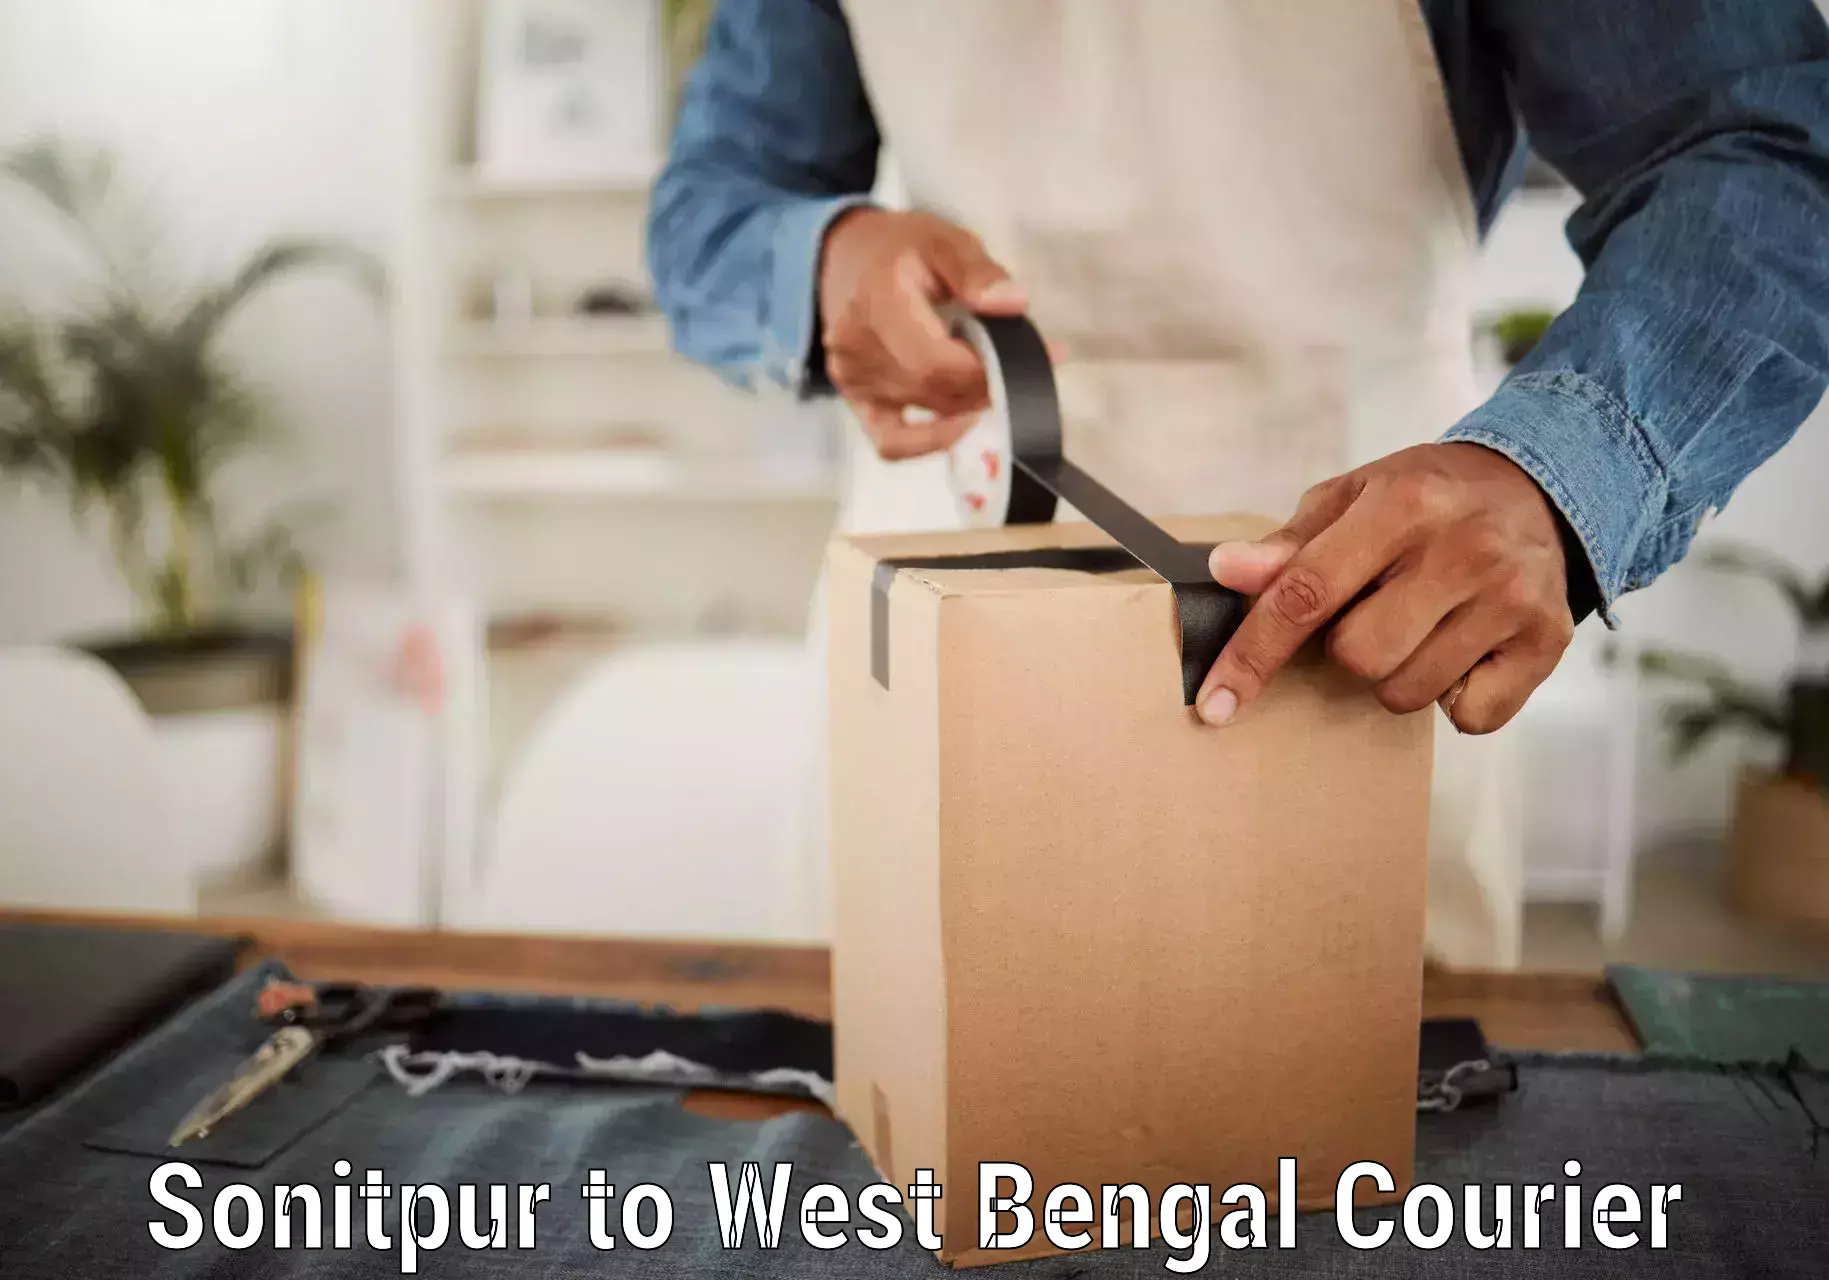 Local delivery service Sonitpur to West Bengal